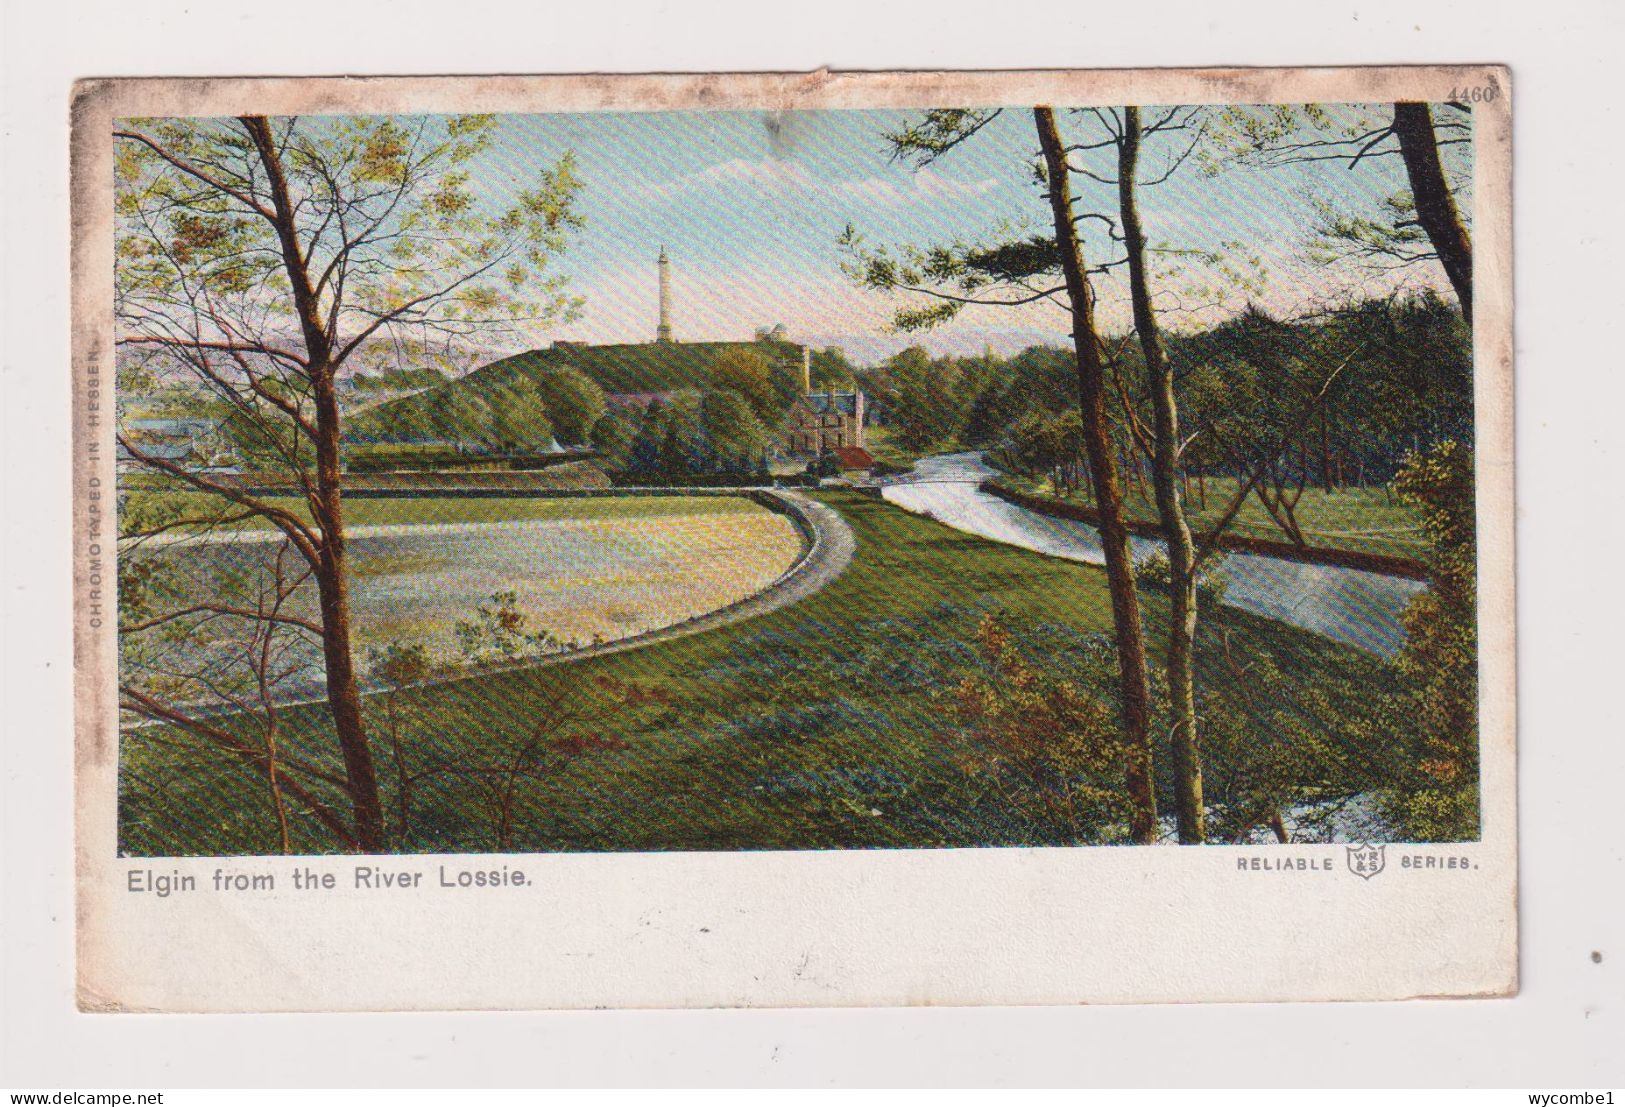 SCOTLAND - Elgin From The River Lossie Used Vintage Postcard - Moray